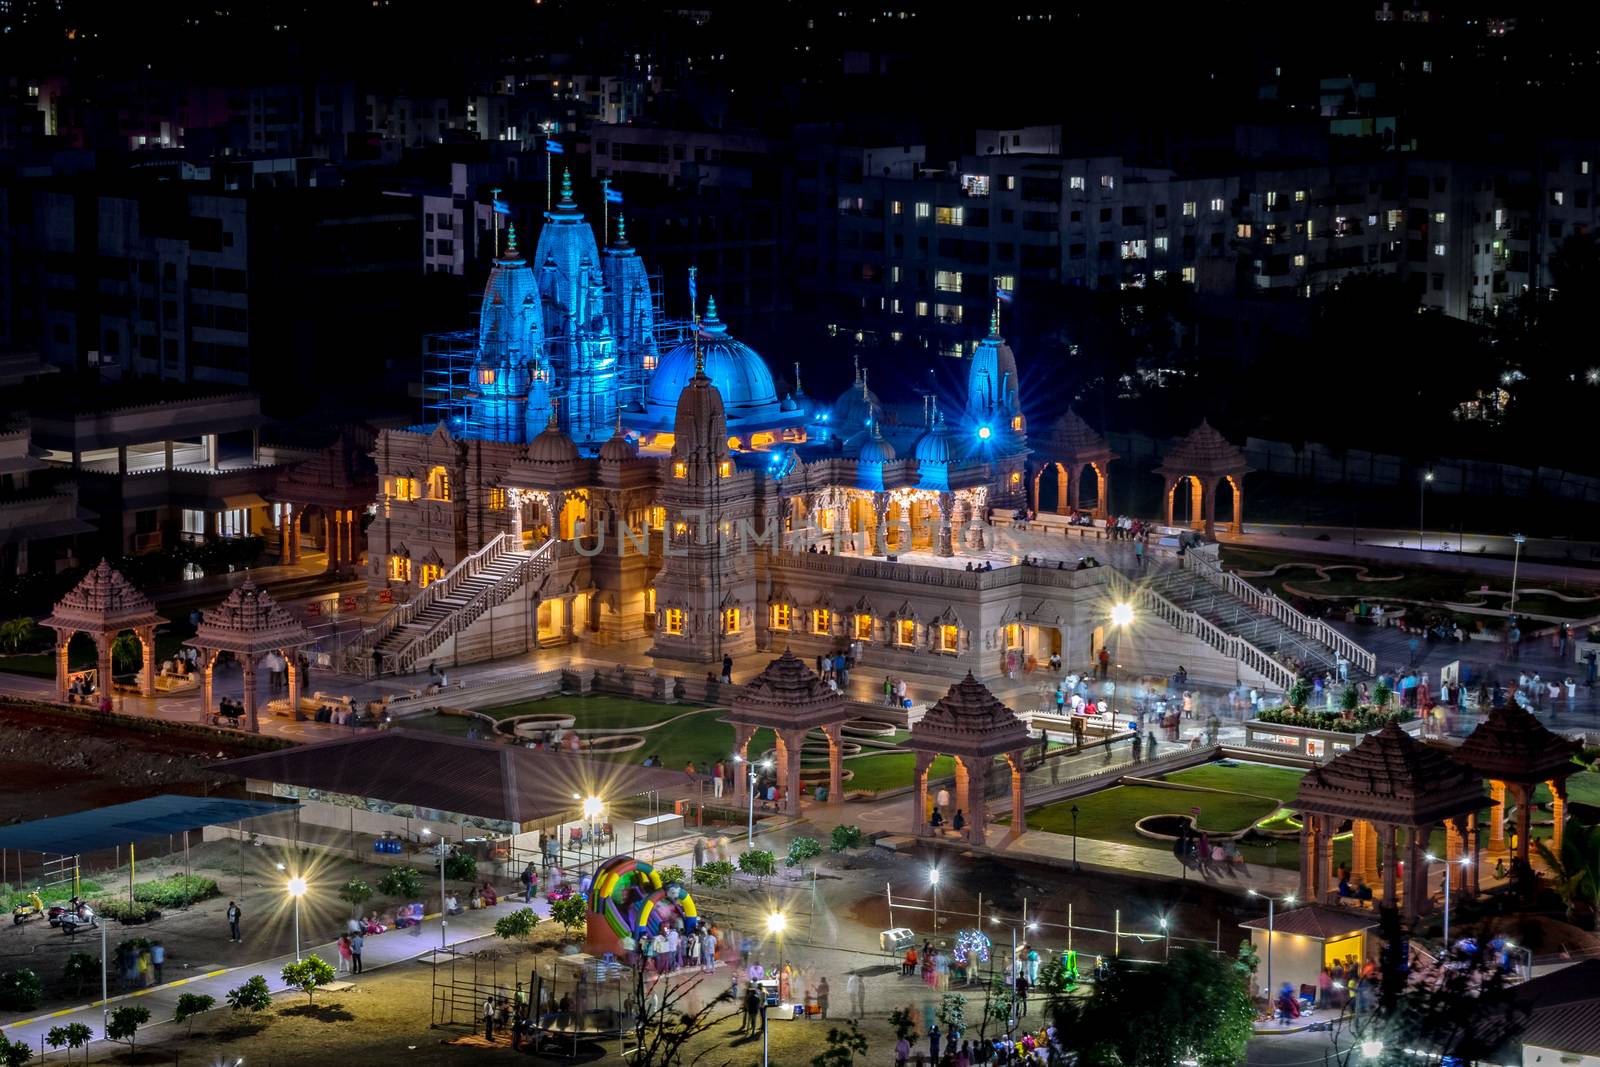 Night view of Shree Swaminarayan temple in Pune. This is an excellent newly built temple located just down the hill. Lot of green landscape around the temple. A spacious place with lot of parking lot. Lot of Hindu festivals are celebrated here with decorations. Lighting during night is also awesome.